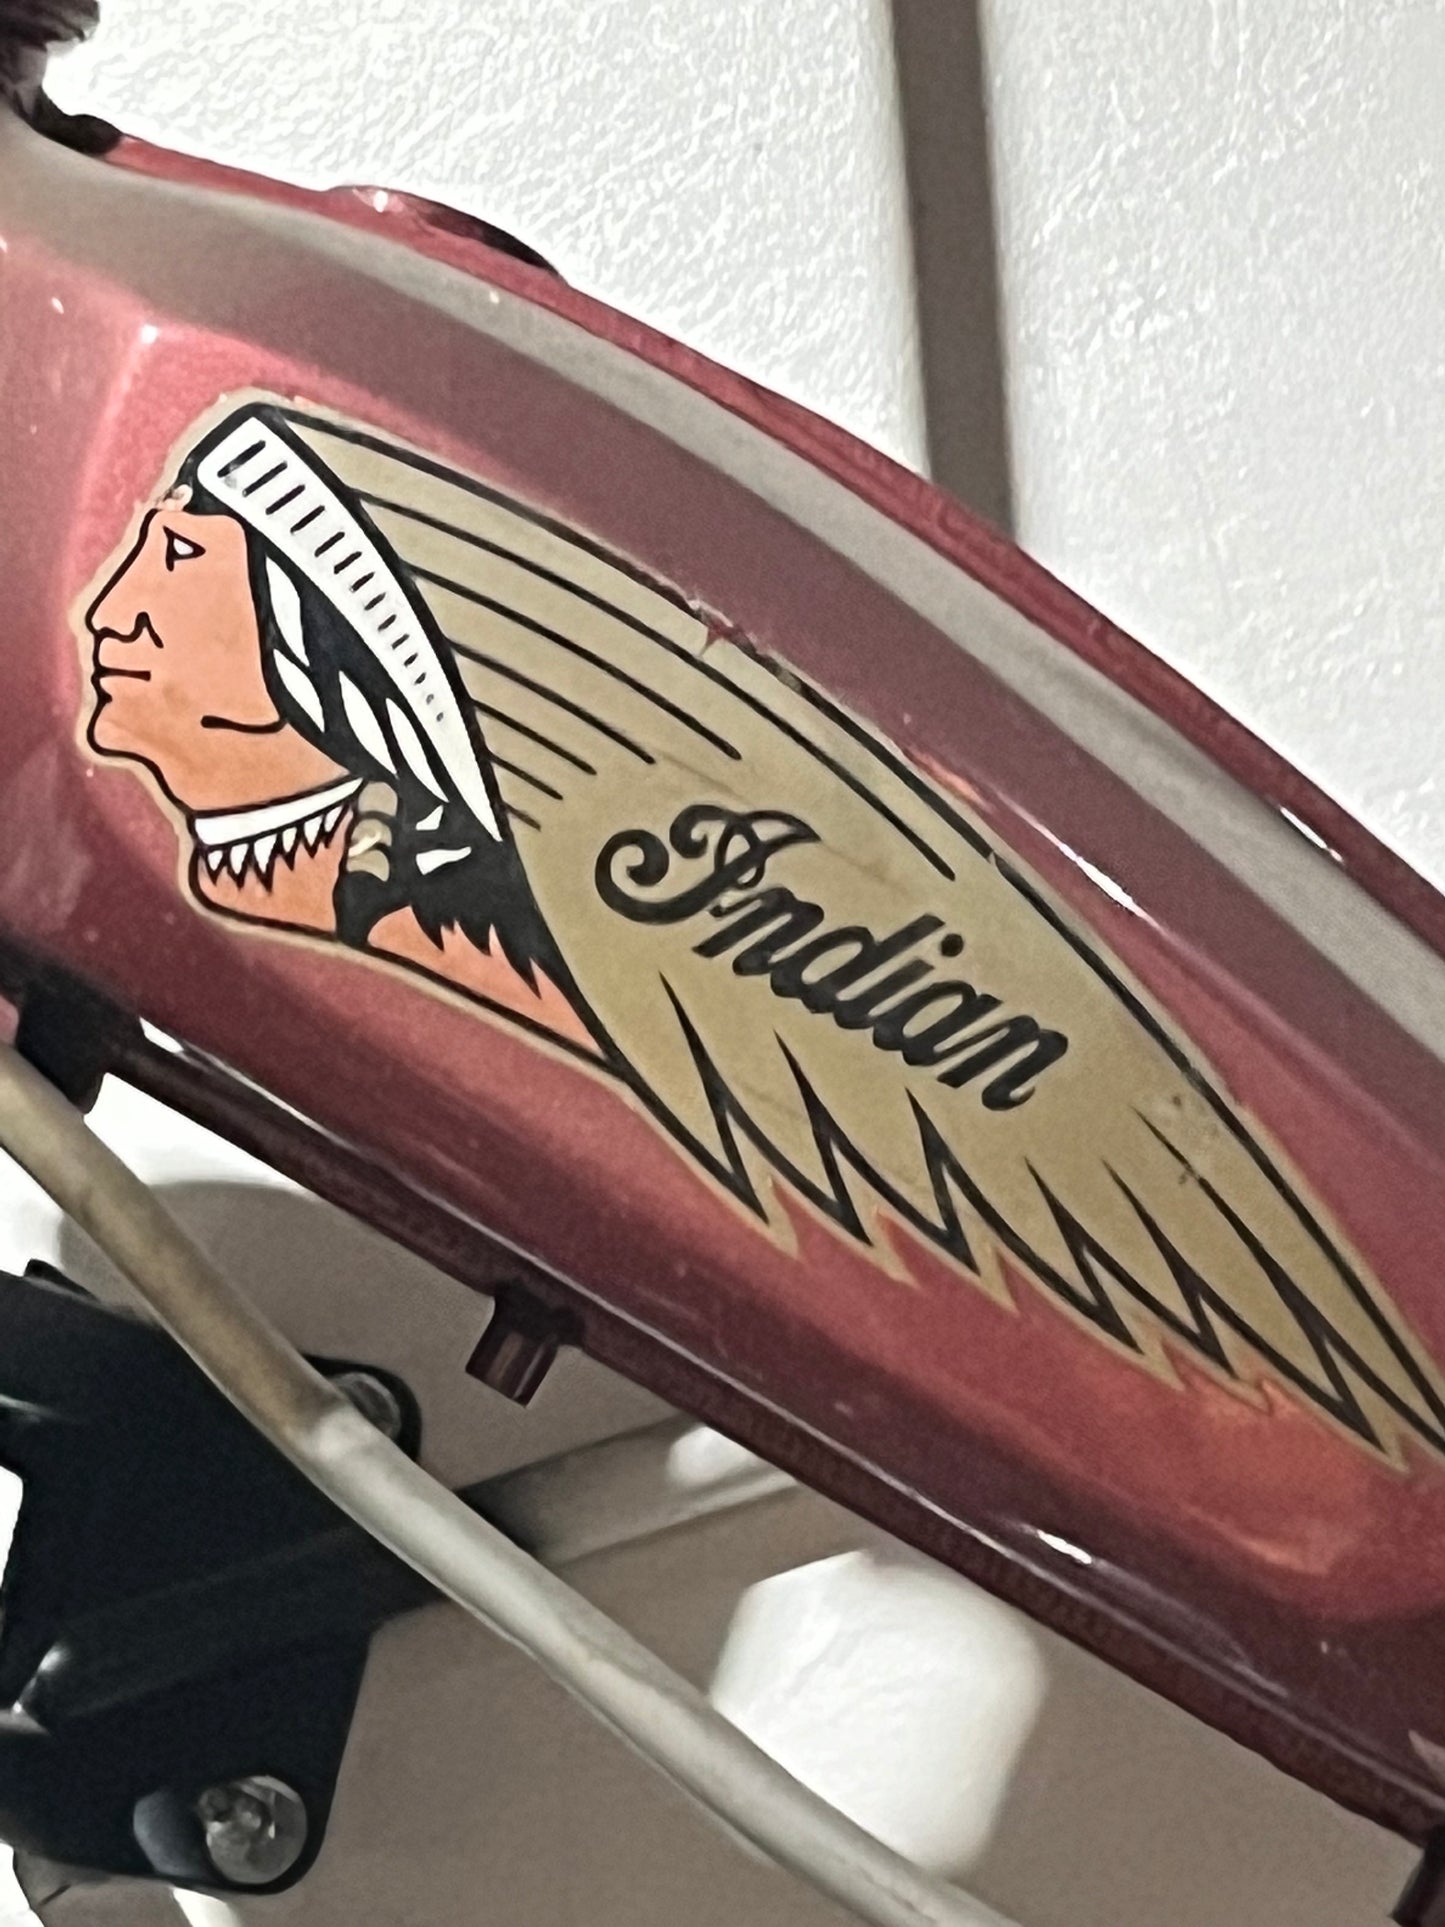 1978 Indian AMI-50 Chief Moped